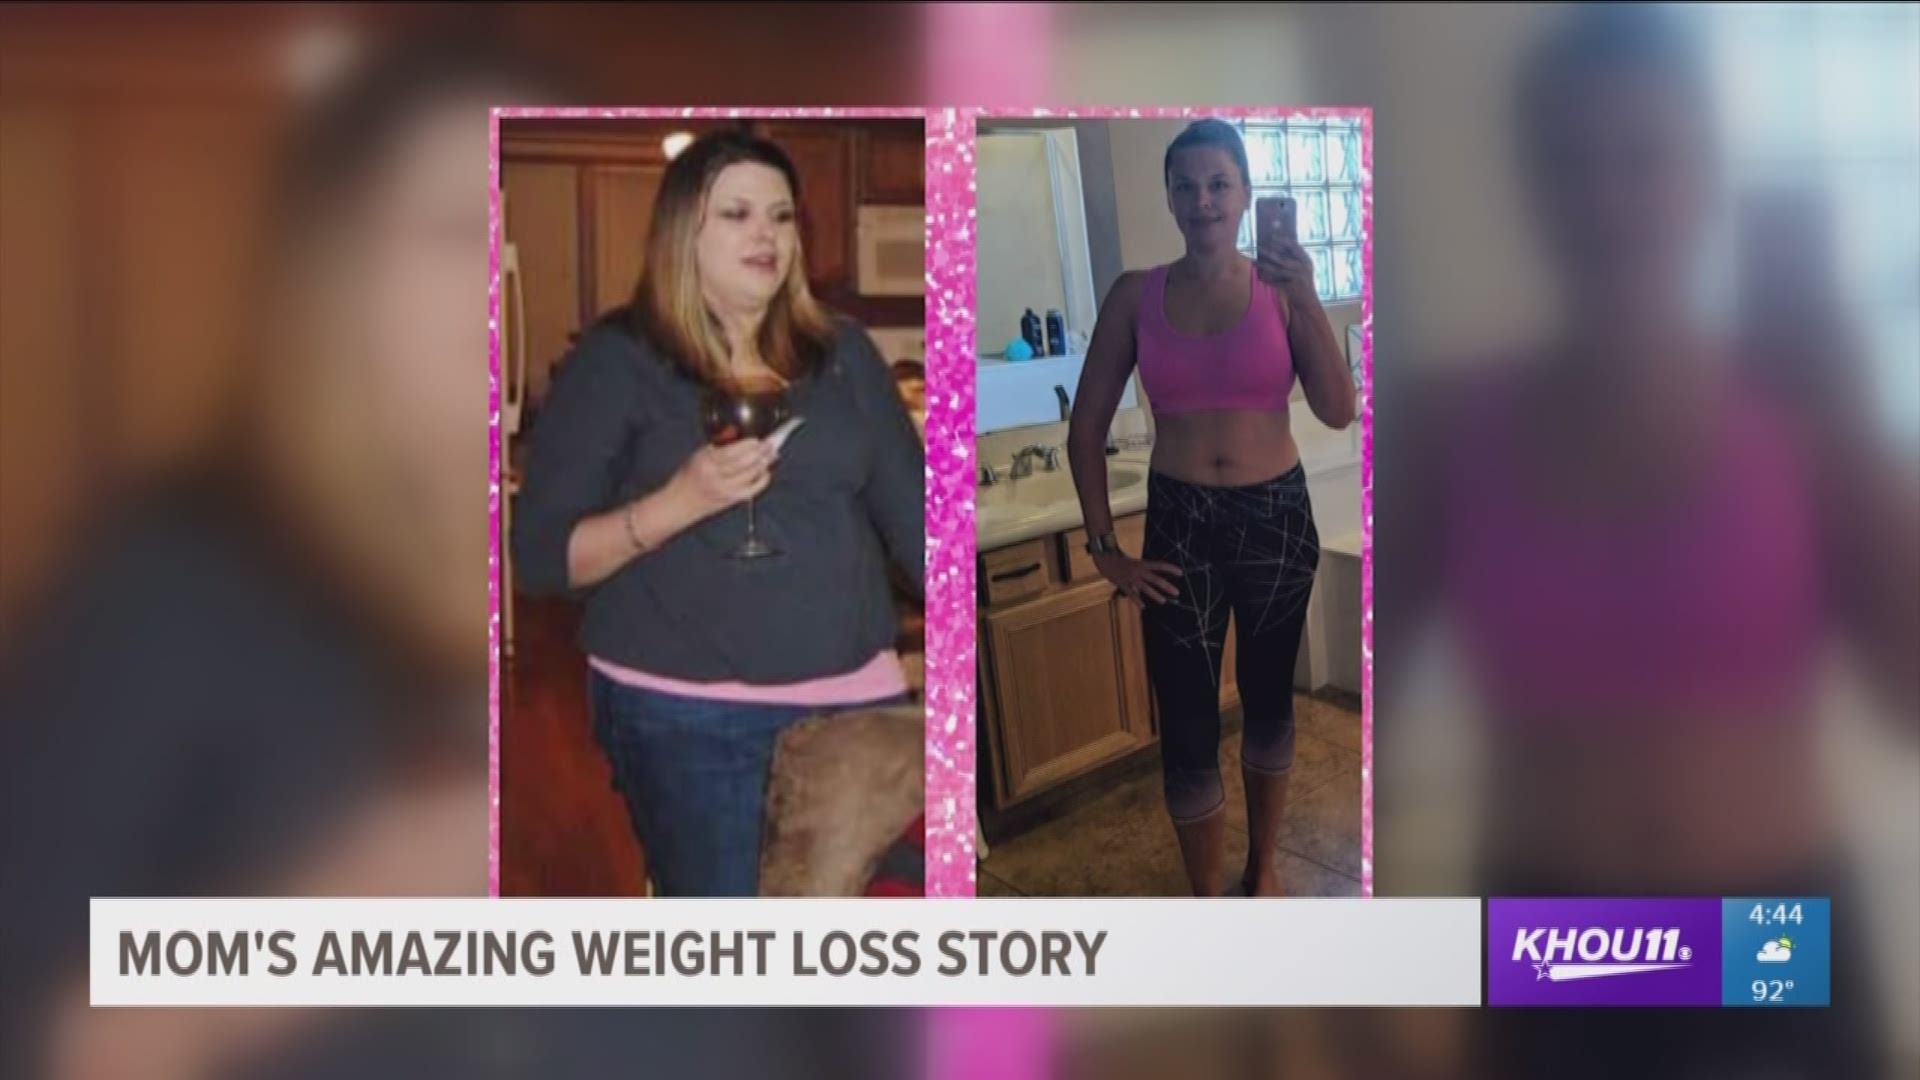 Mom drops 105 lbs by eating pic